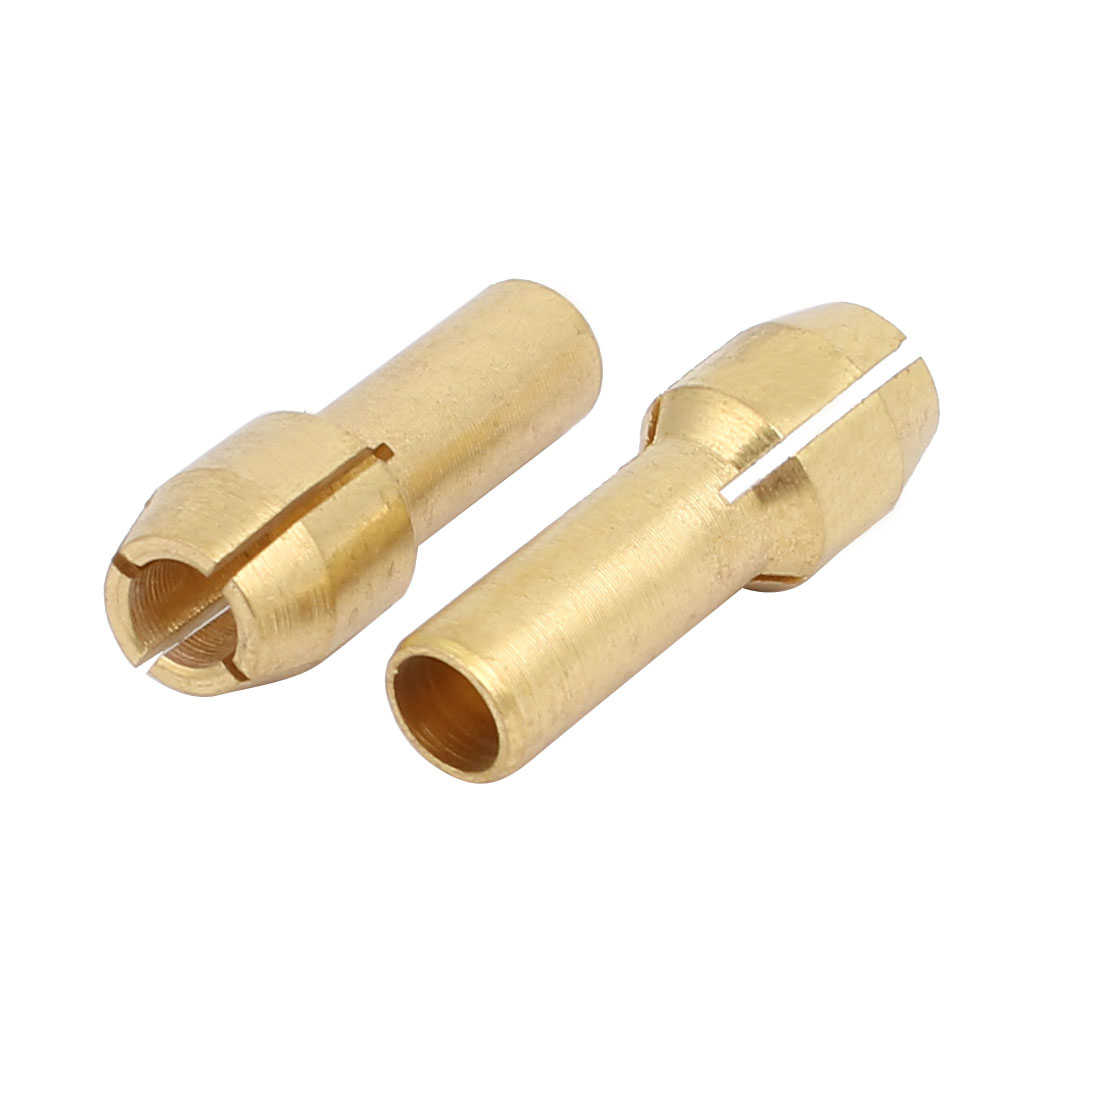 15pcs 3.2mm Clamping Dia Brass Qucik Change Collet Nut for Rotary Power Tool